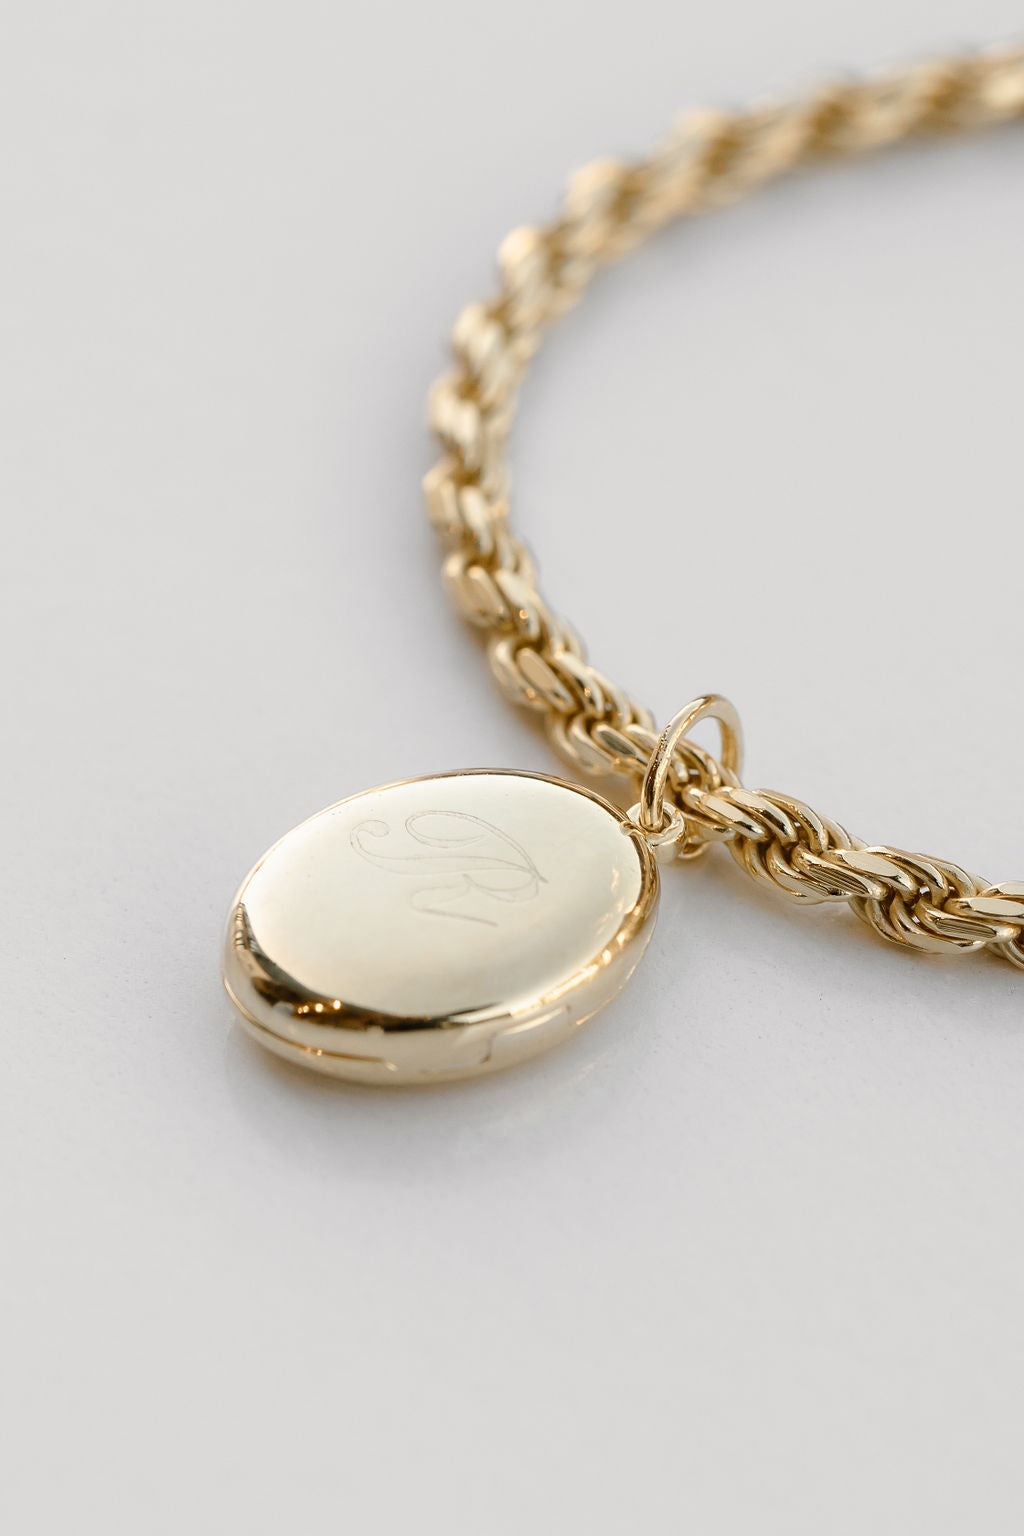 gold oval locket engraved with rope chain necklace